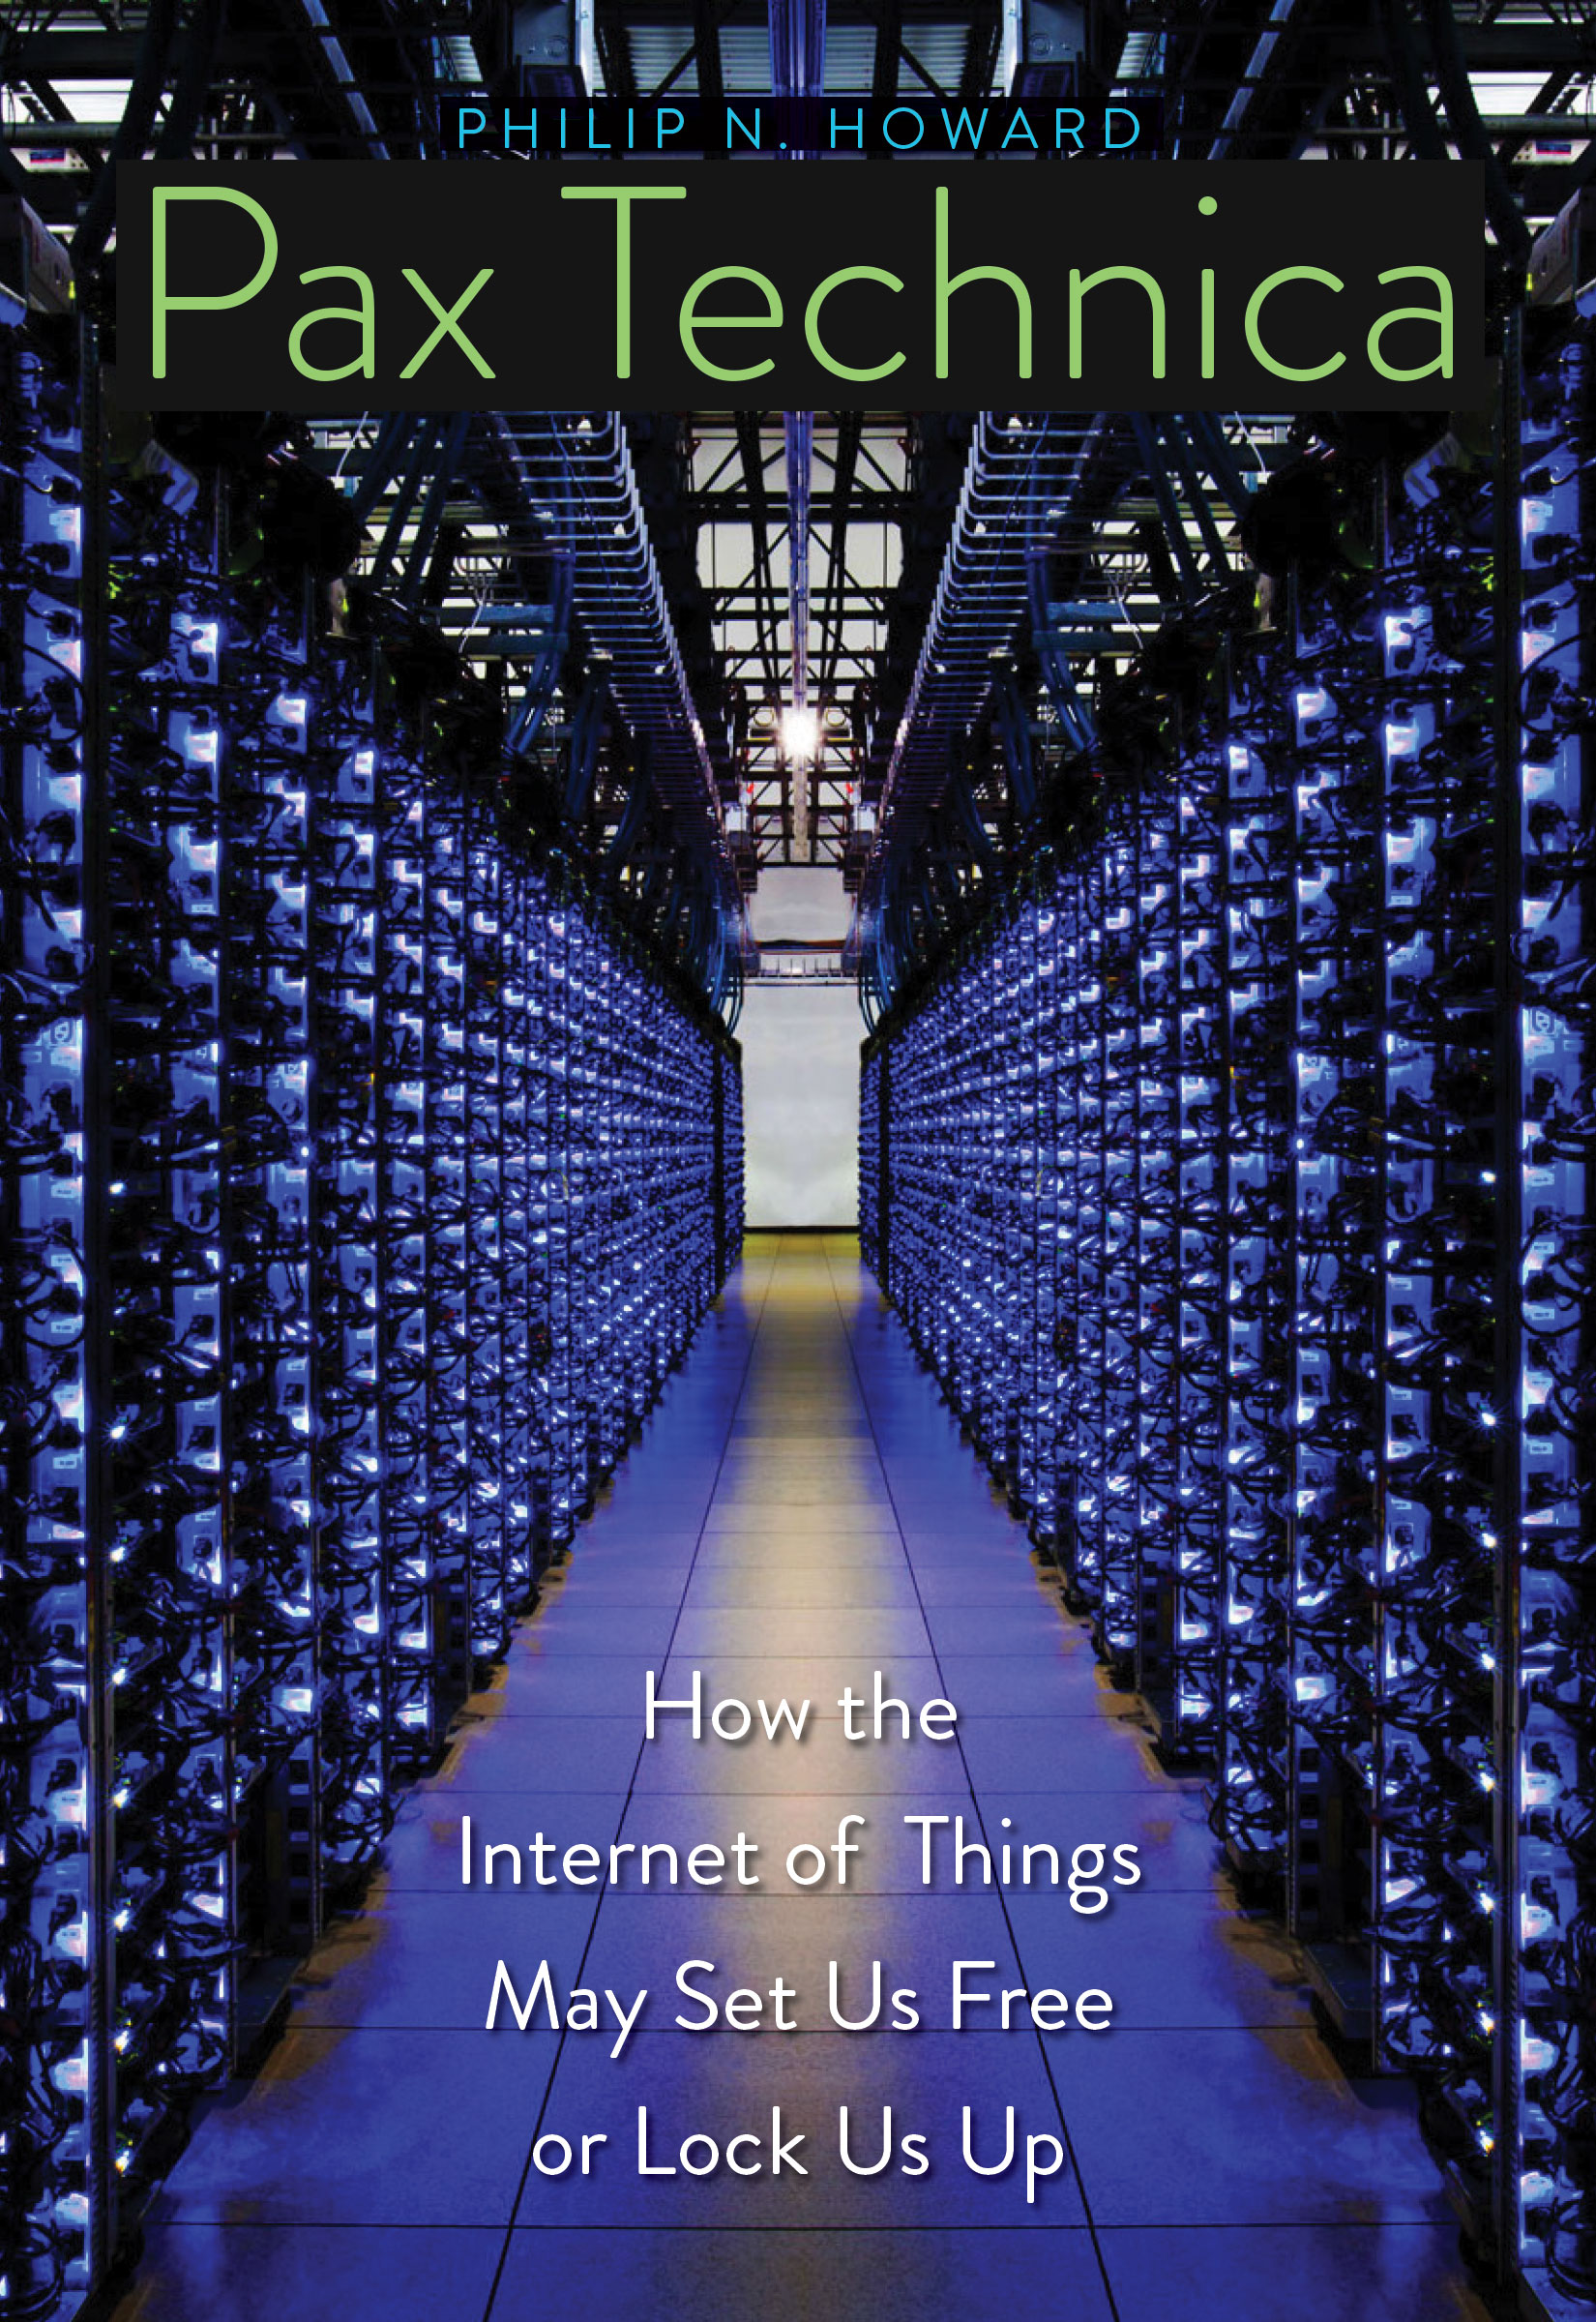 Image of Pax Technica book cover, which shows a pathway lined      with floor-to-ceiling servers on each side.